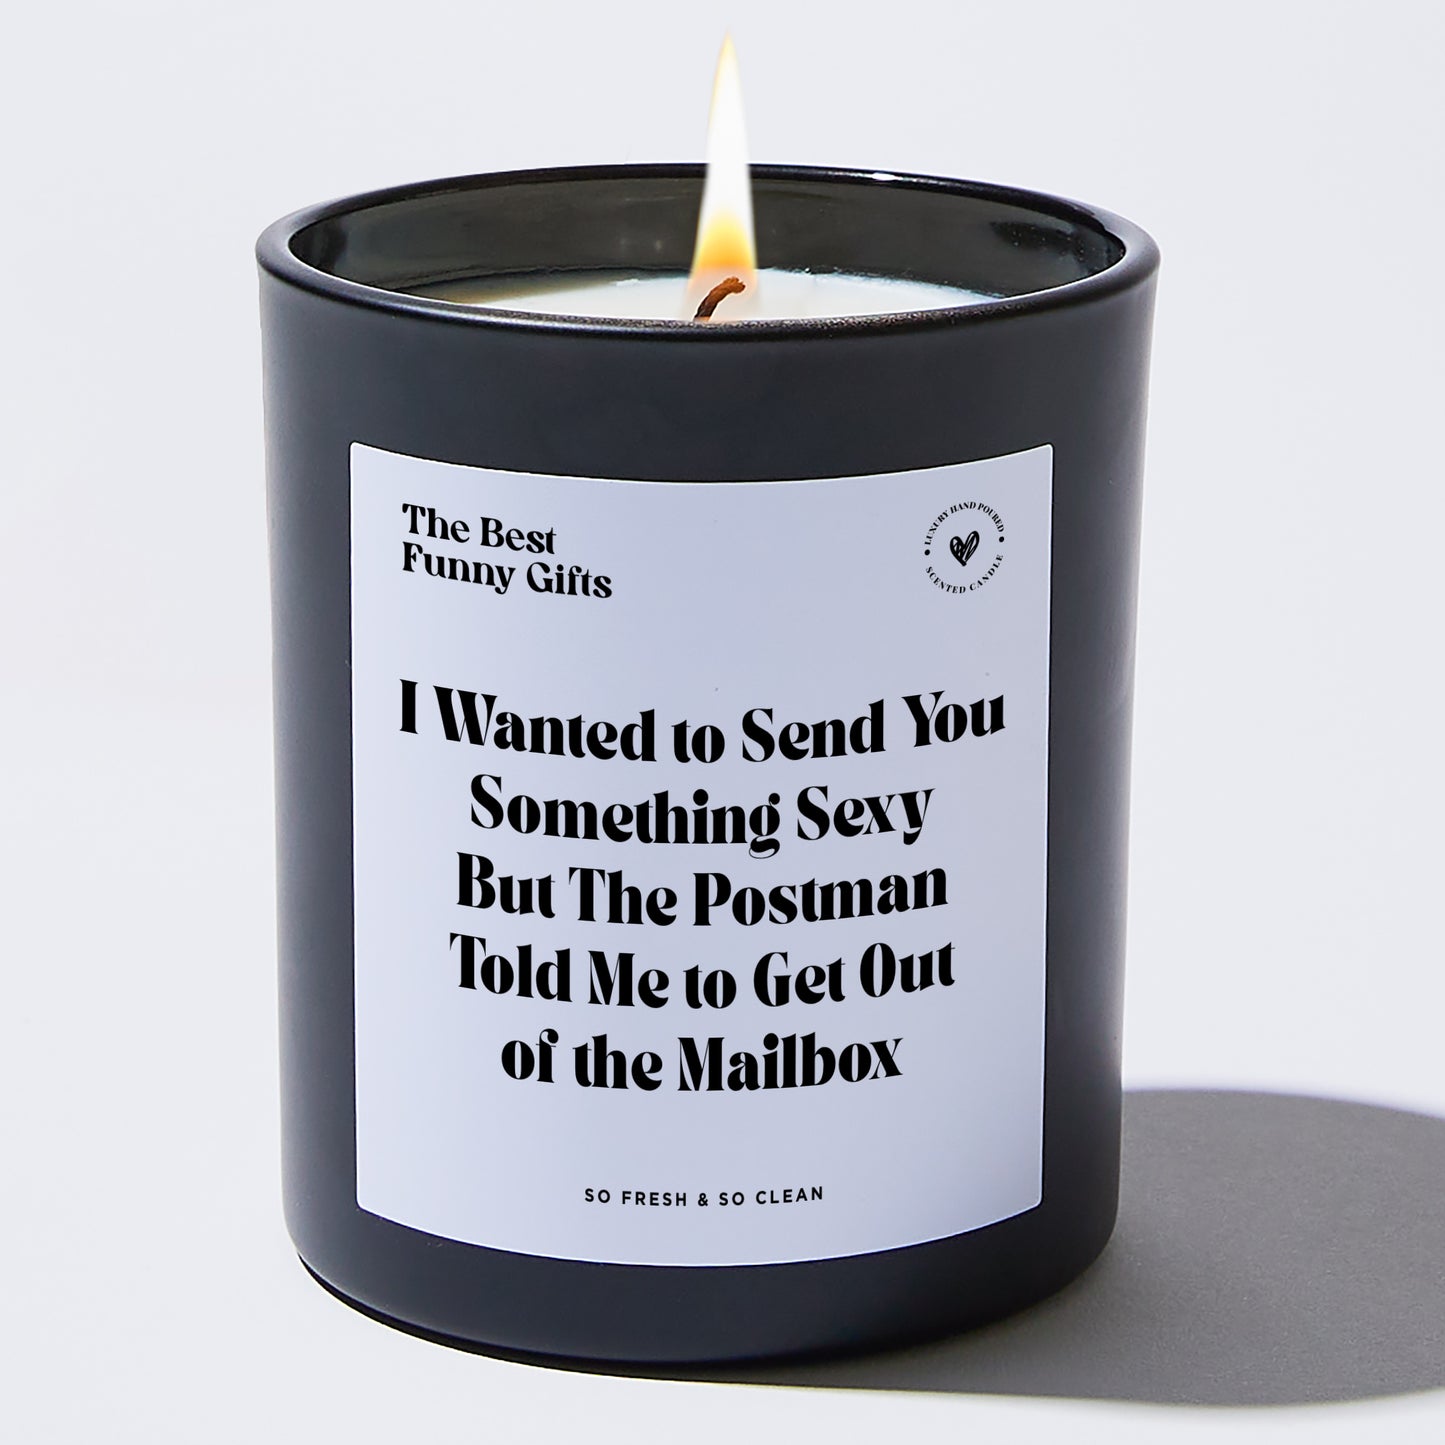 Anniversary Present - I Wanted to Send You Something Sexy but the Postman Told Me to Get Out of the Mailbox - Candle